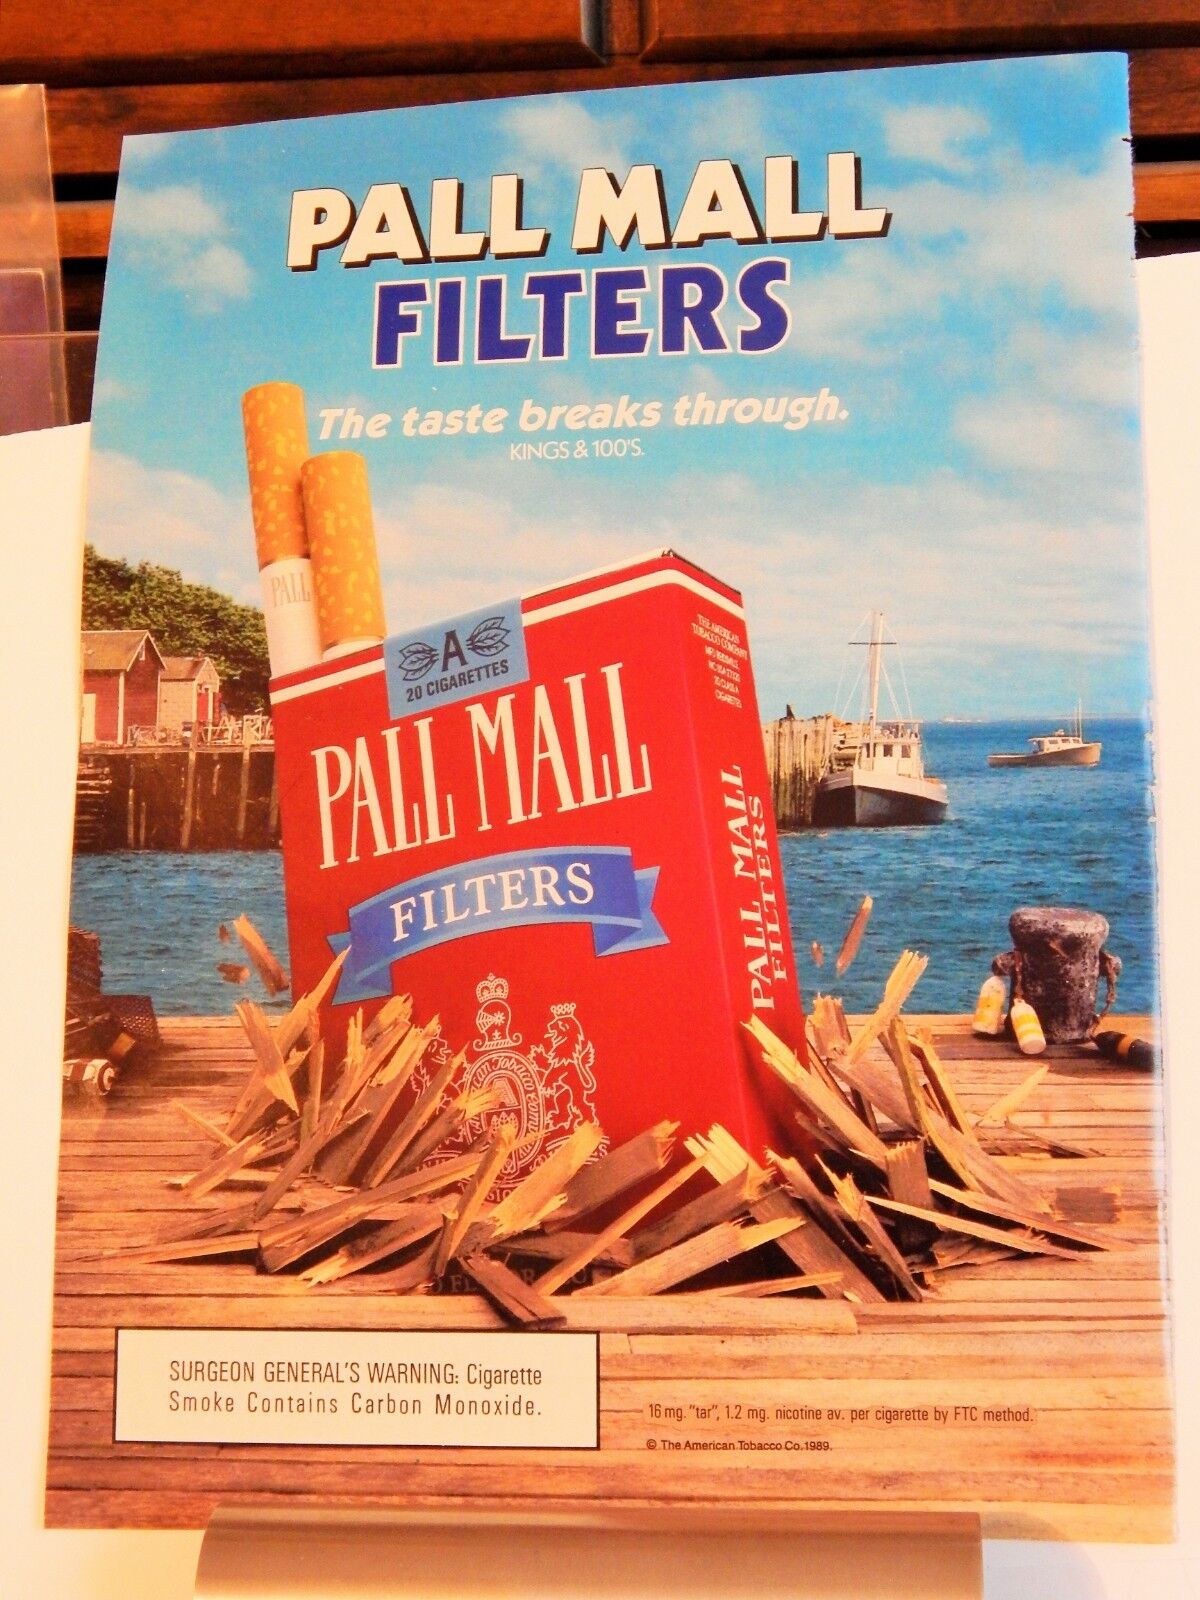 PALL MALL FILTERS CIGARETTE ORIGINAL VTG 1989 Photo Poster painting AD, RARE COLLECTIBLE SOUGHT